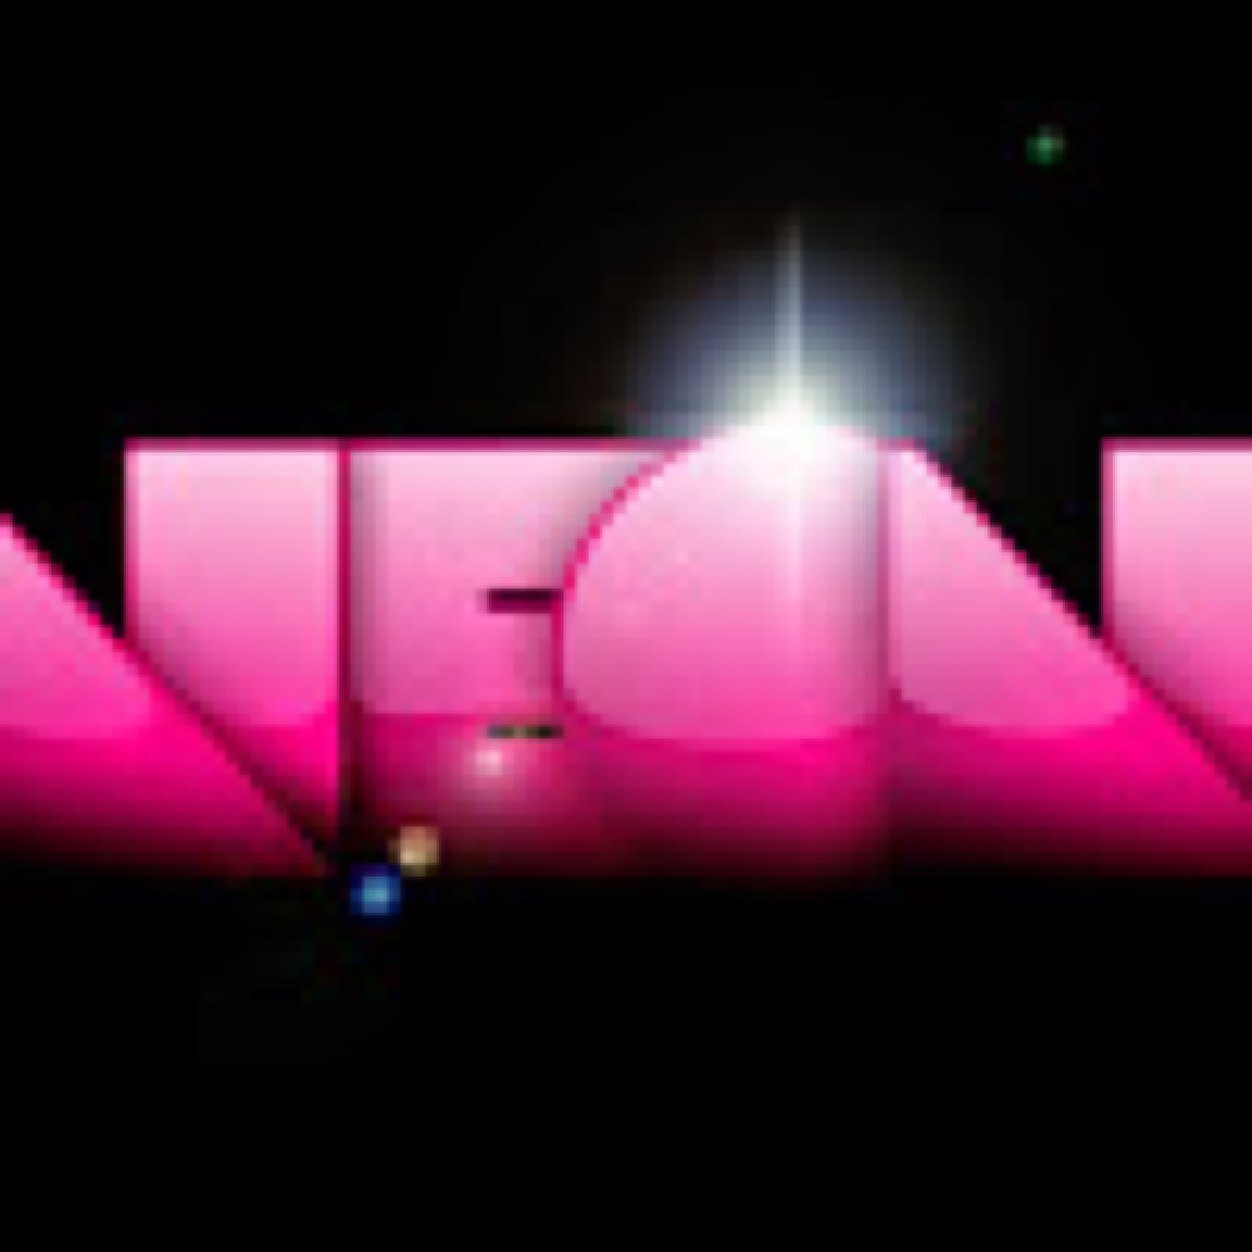 Neon, But feel free to call me, Colton 15, Trickshoter/Sniper. http://t.co/UrahlBBzeV. The GFX On my twitter/youtube are designed by @ZenLoadzy or Crunk Loadzy.